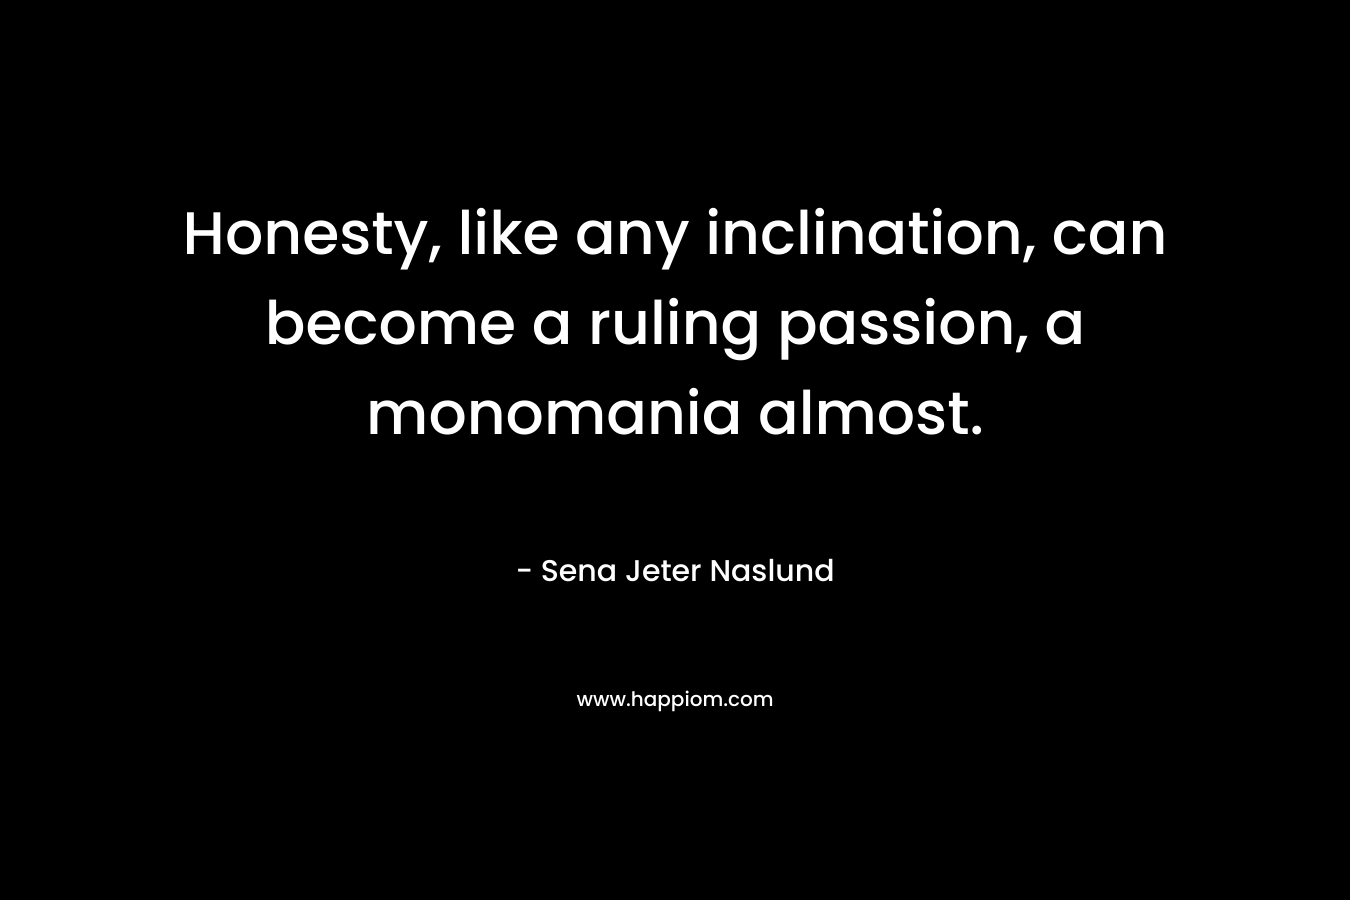 Honesty, like any inclination, can become a ruling passion, a monomania almost. – Sena Jeter Naslund